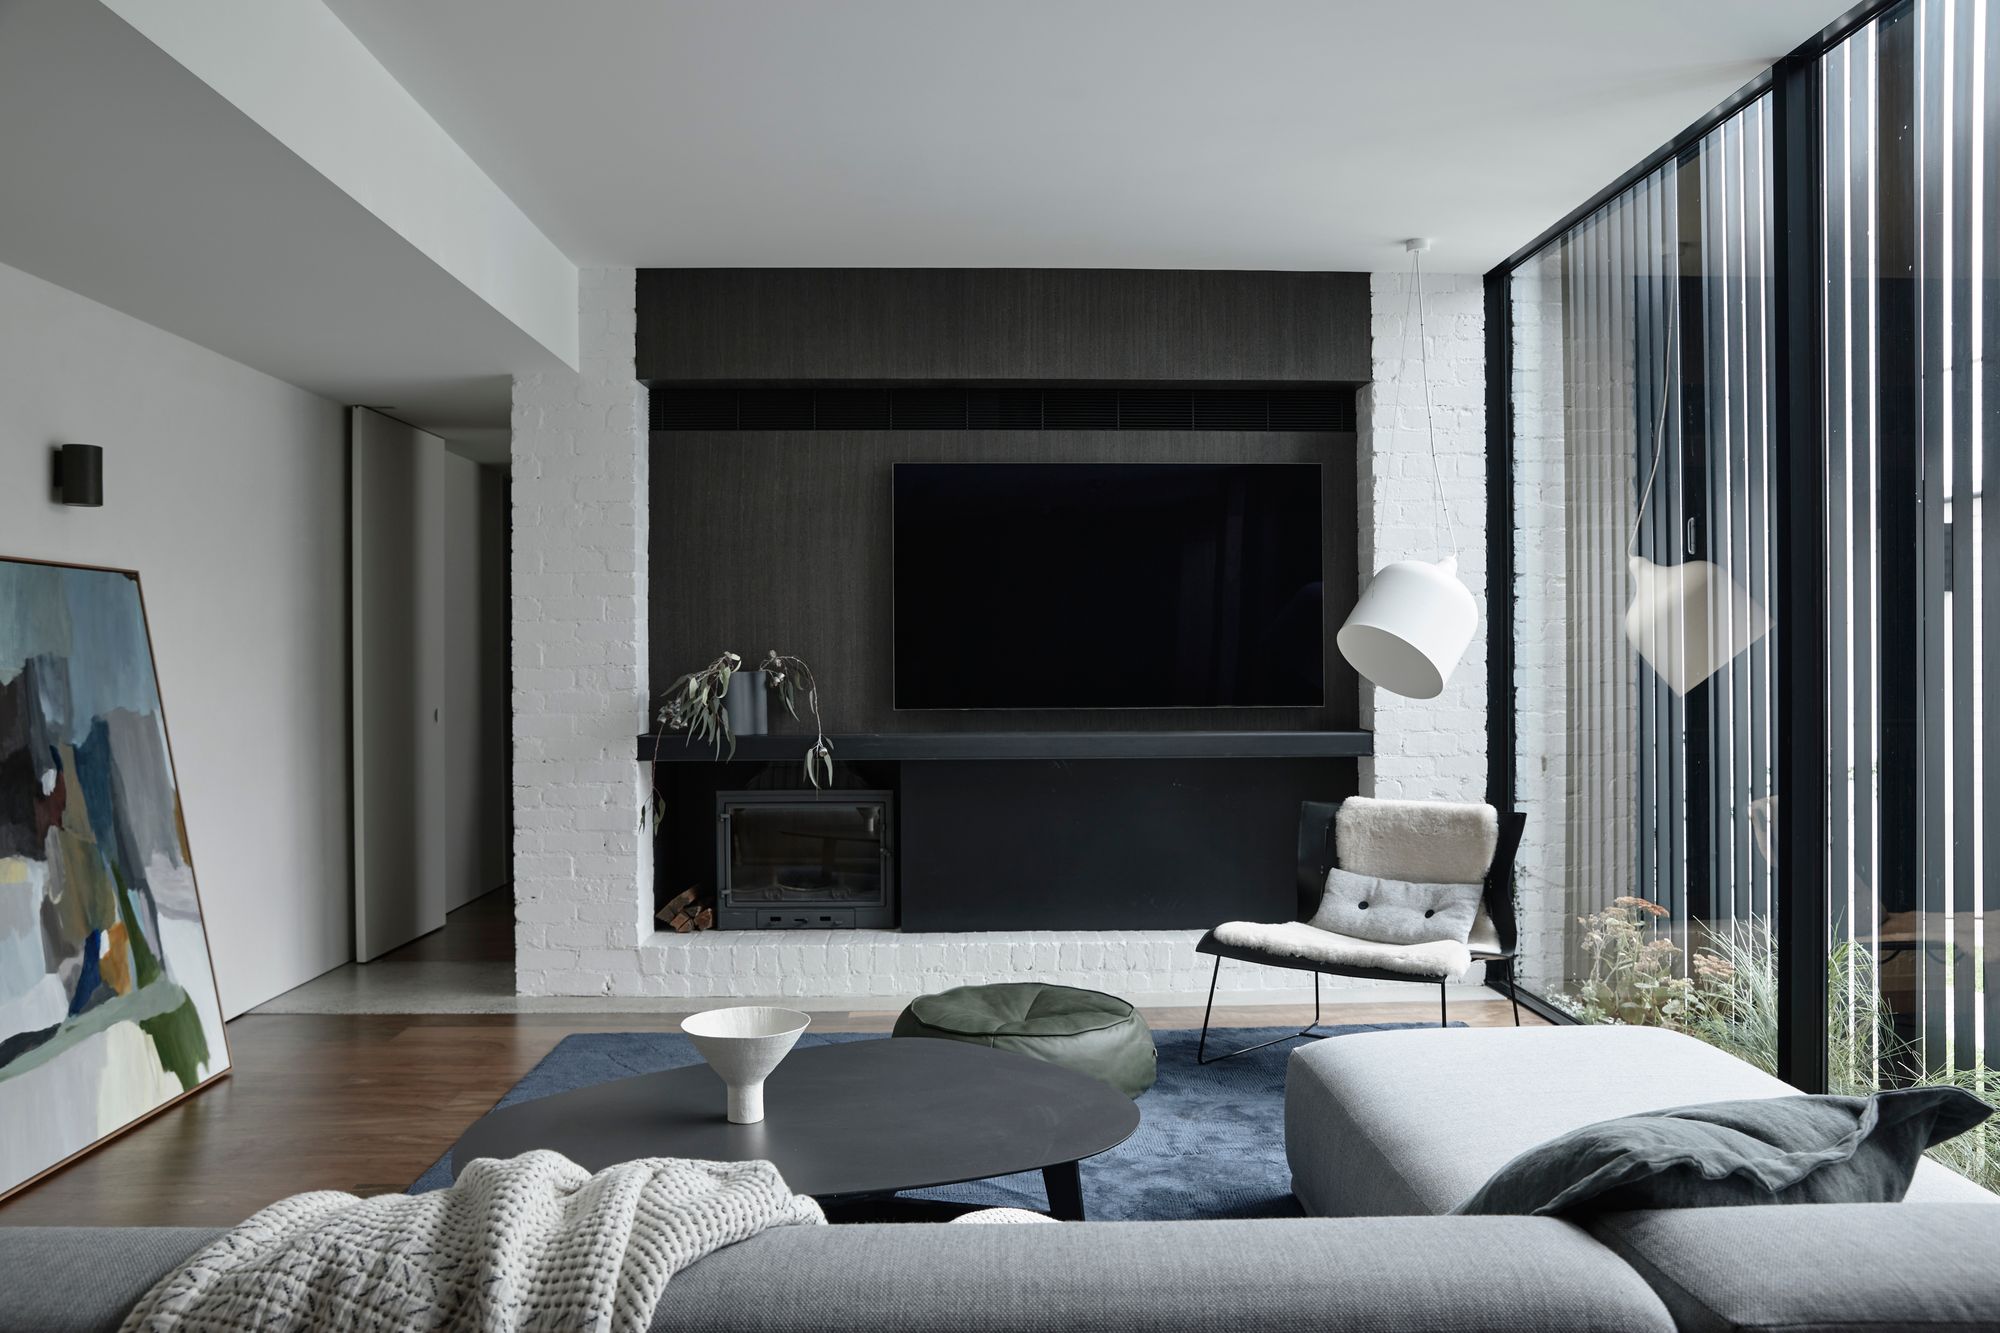 Carlton North Residence by Project 12 Architecture. Living room, featuring living edge furniture, Jardan Decor, studio gallery artwork and a Halcyon lake rug.  